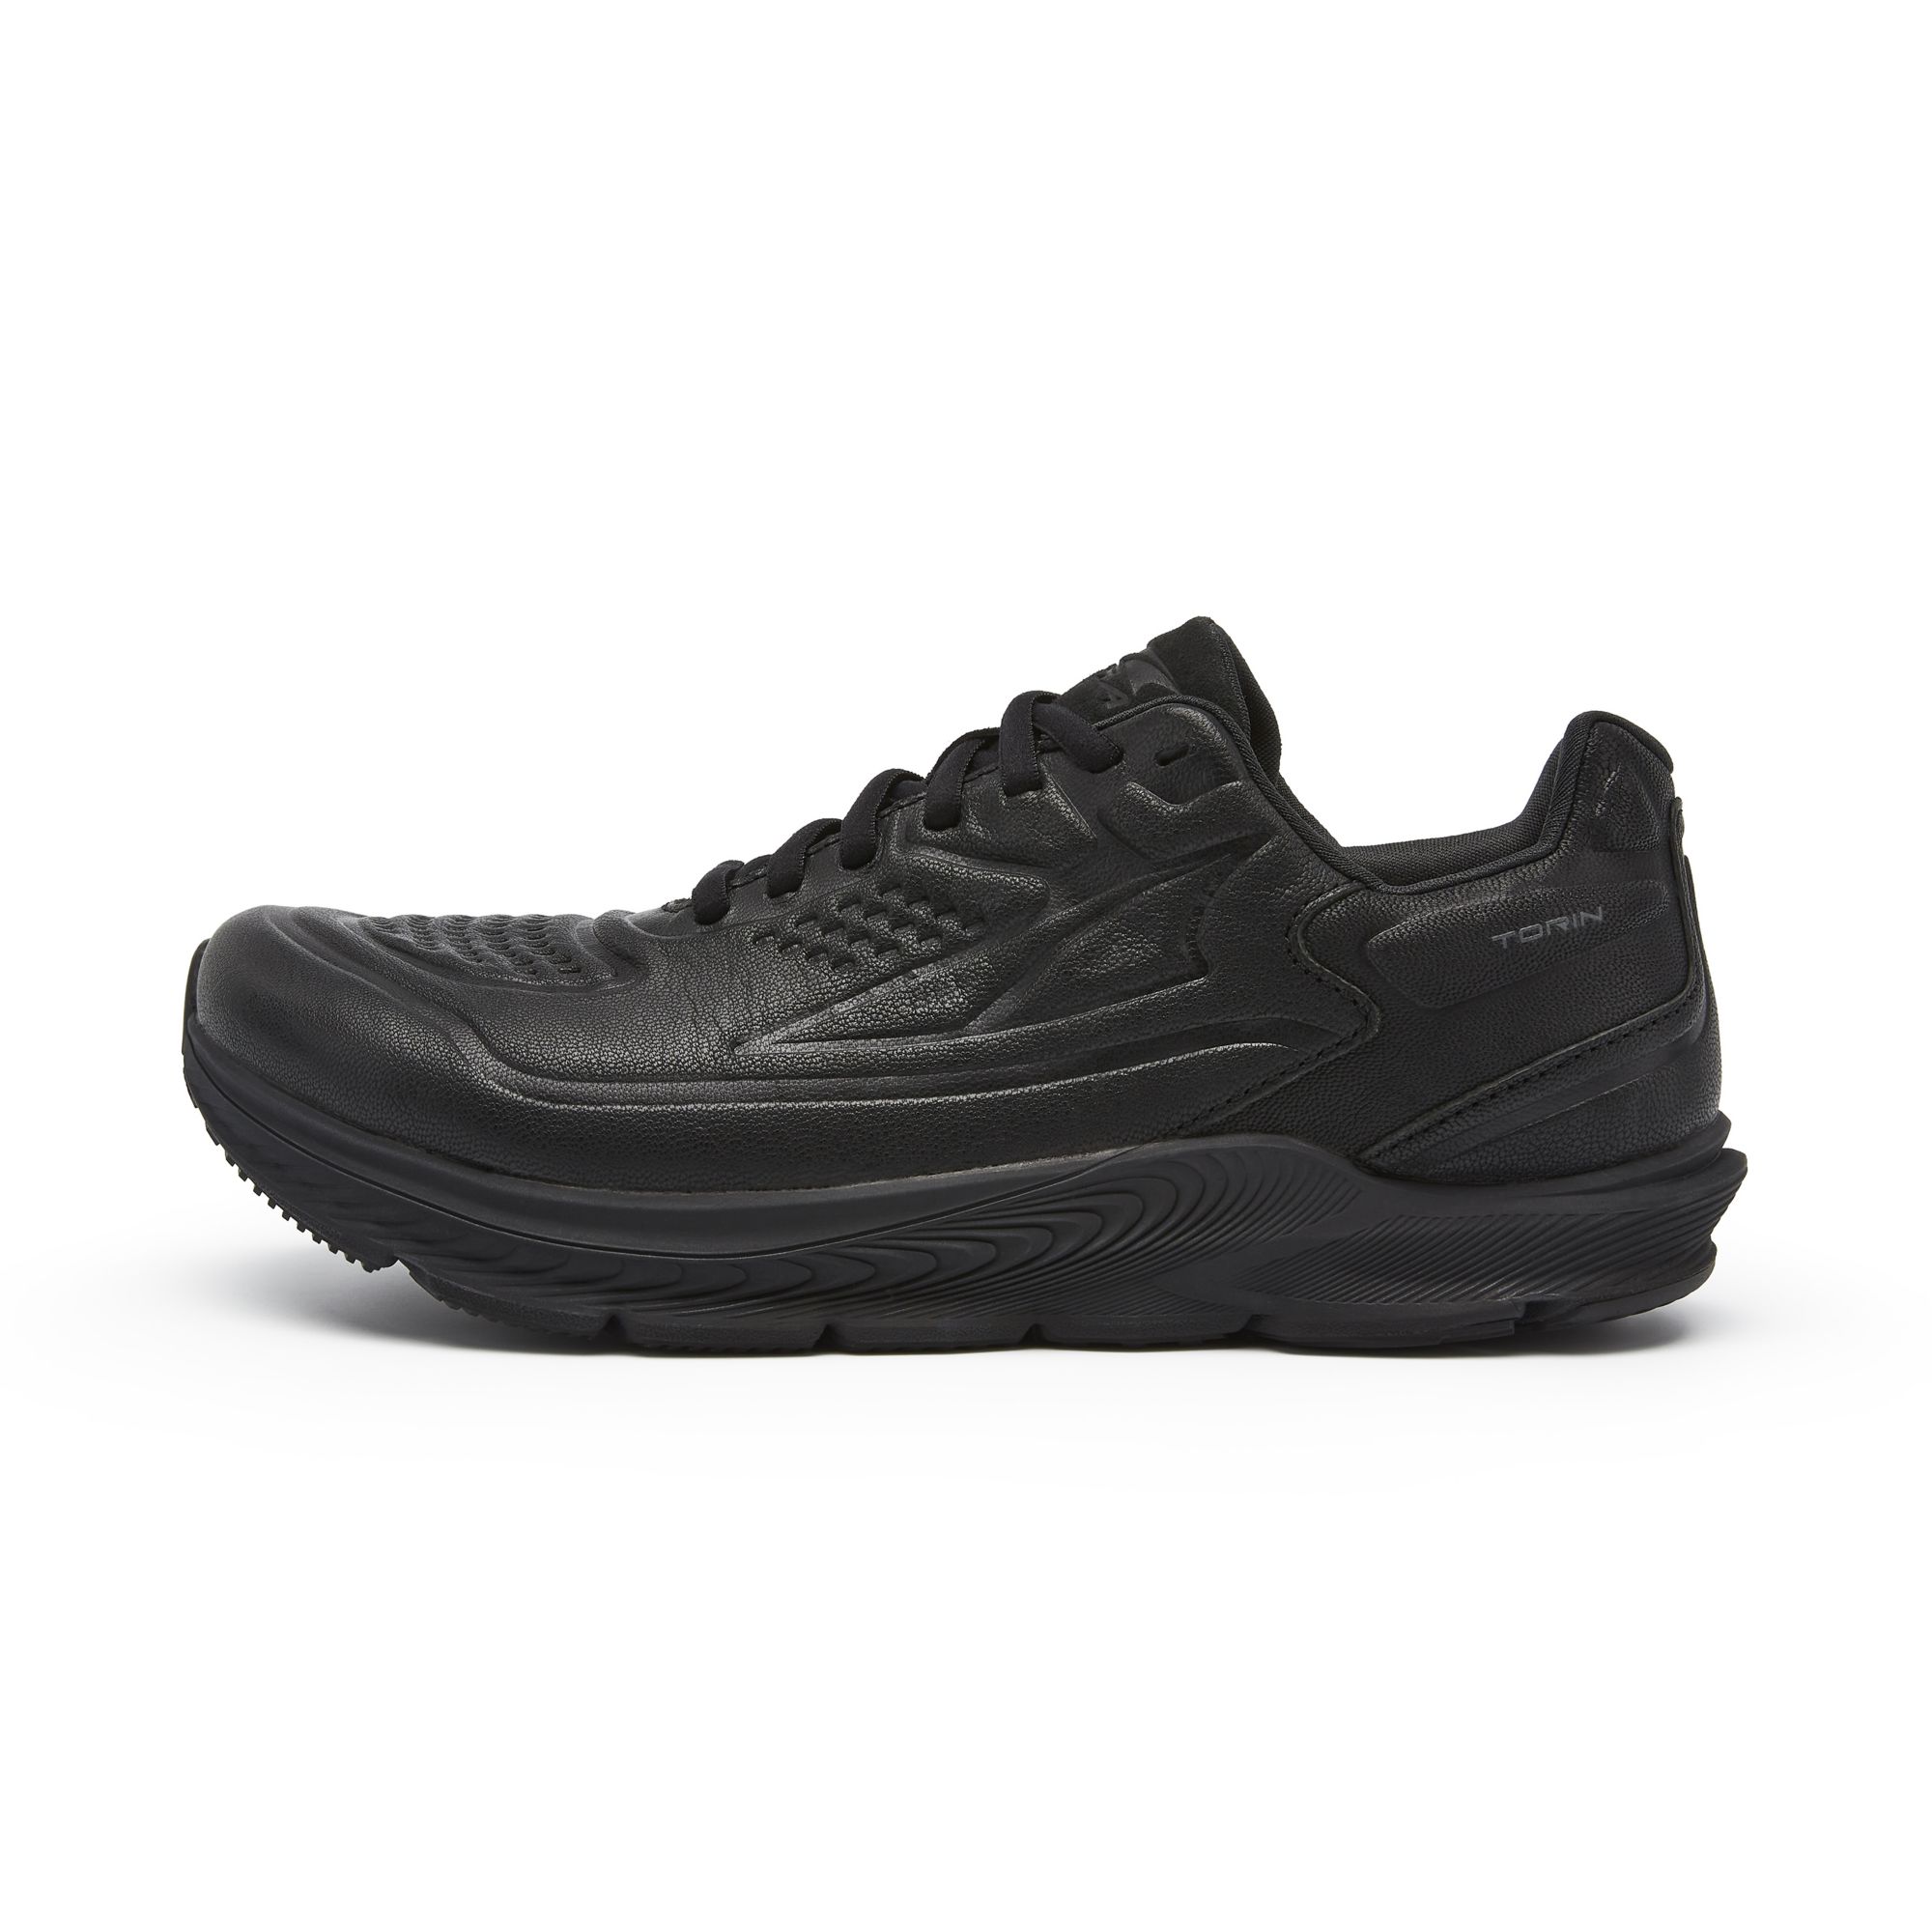 Women’s Torin 5 Leather Shoe | Altra Running Shoes